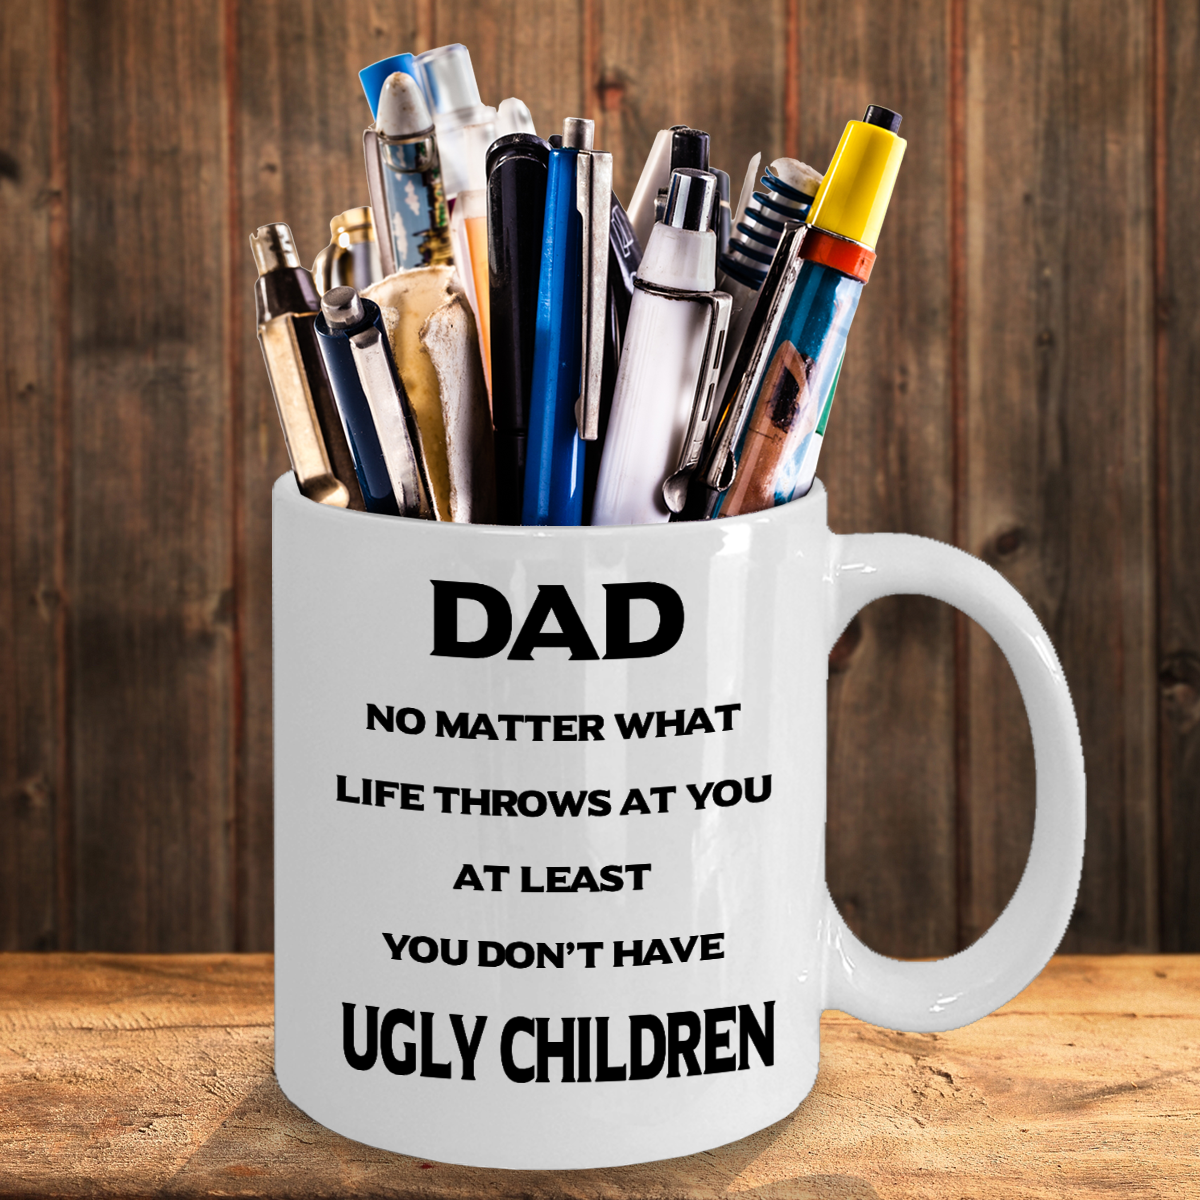 Funny Coffee Mug For Dad - No Matter What Life Throws At You Great Birthday Father's Day Christmas Gift Ideas For Dad - White Ceramic 11oz